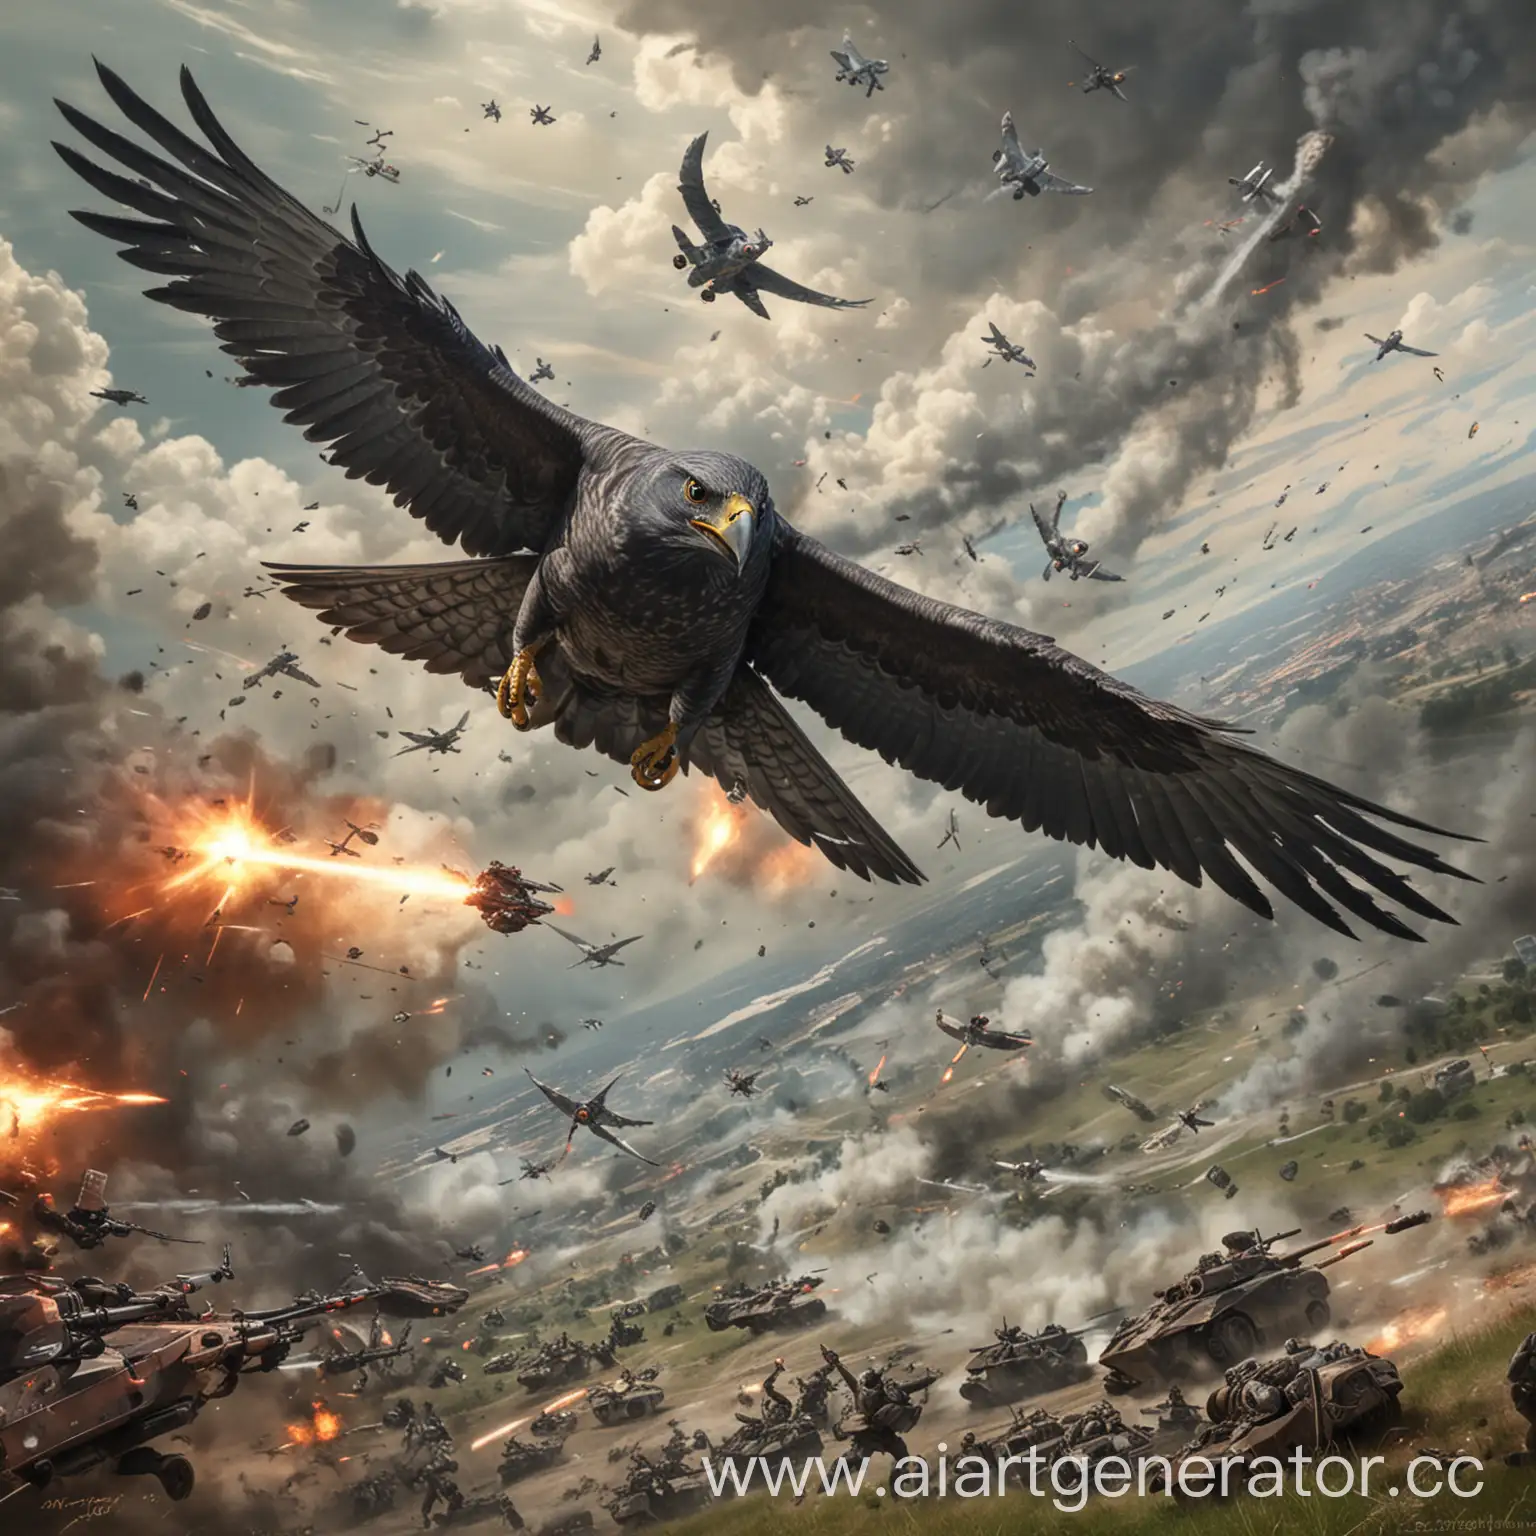 Accipiter-War-Epic-Battle-of-Raptors-in-Forest-Clearing